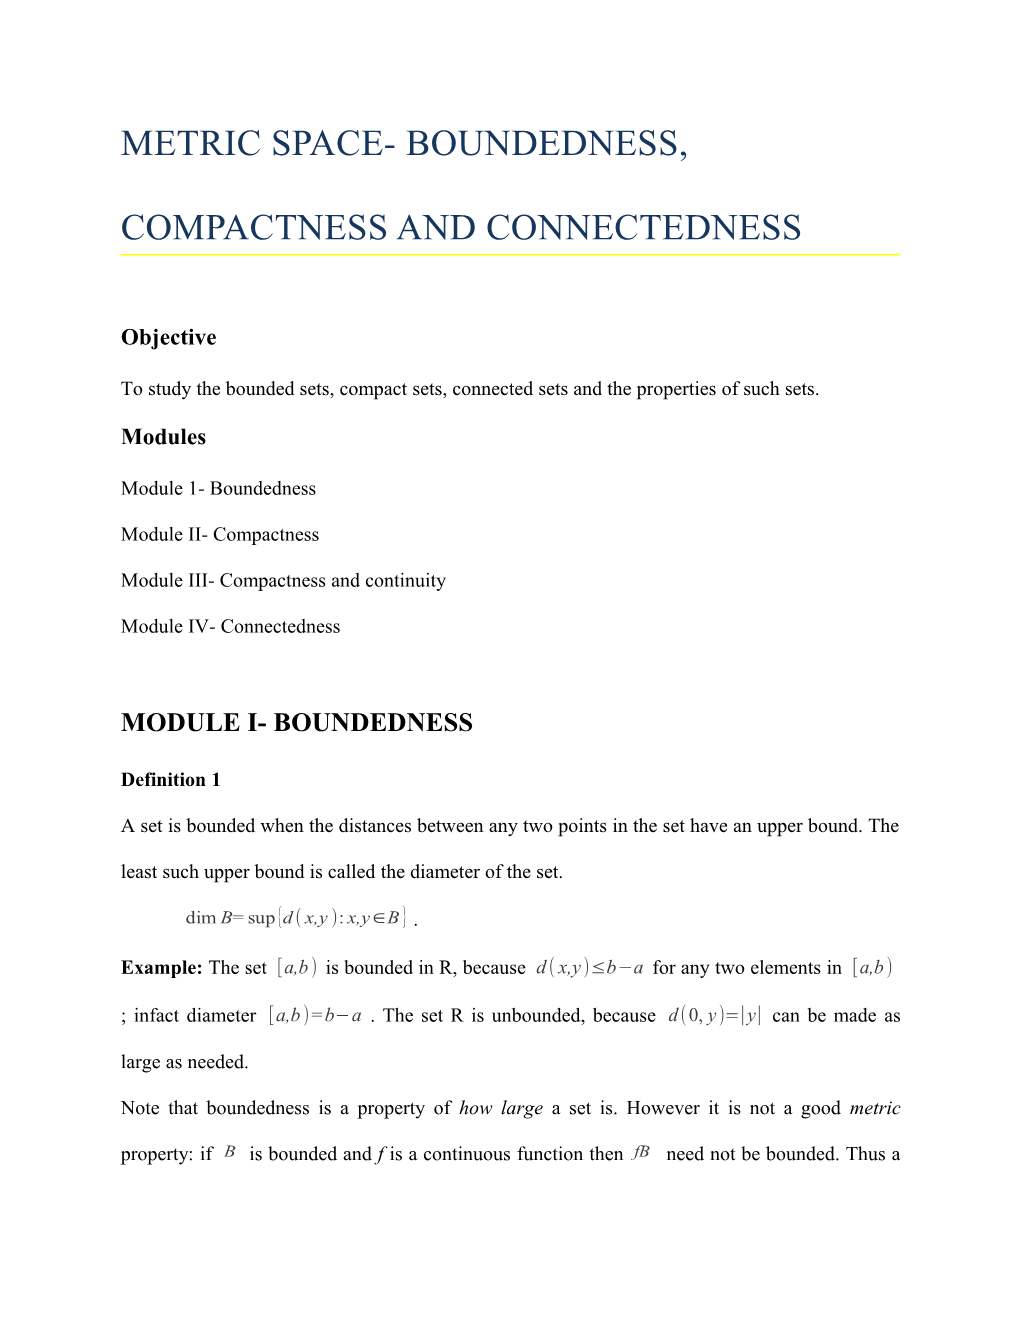 Metric Space- Boundedness, Compactness and Connectedness